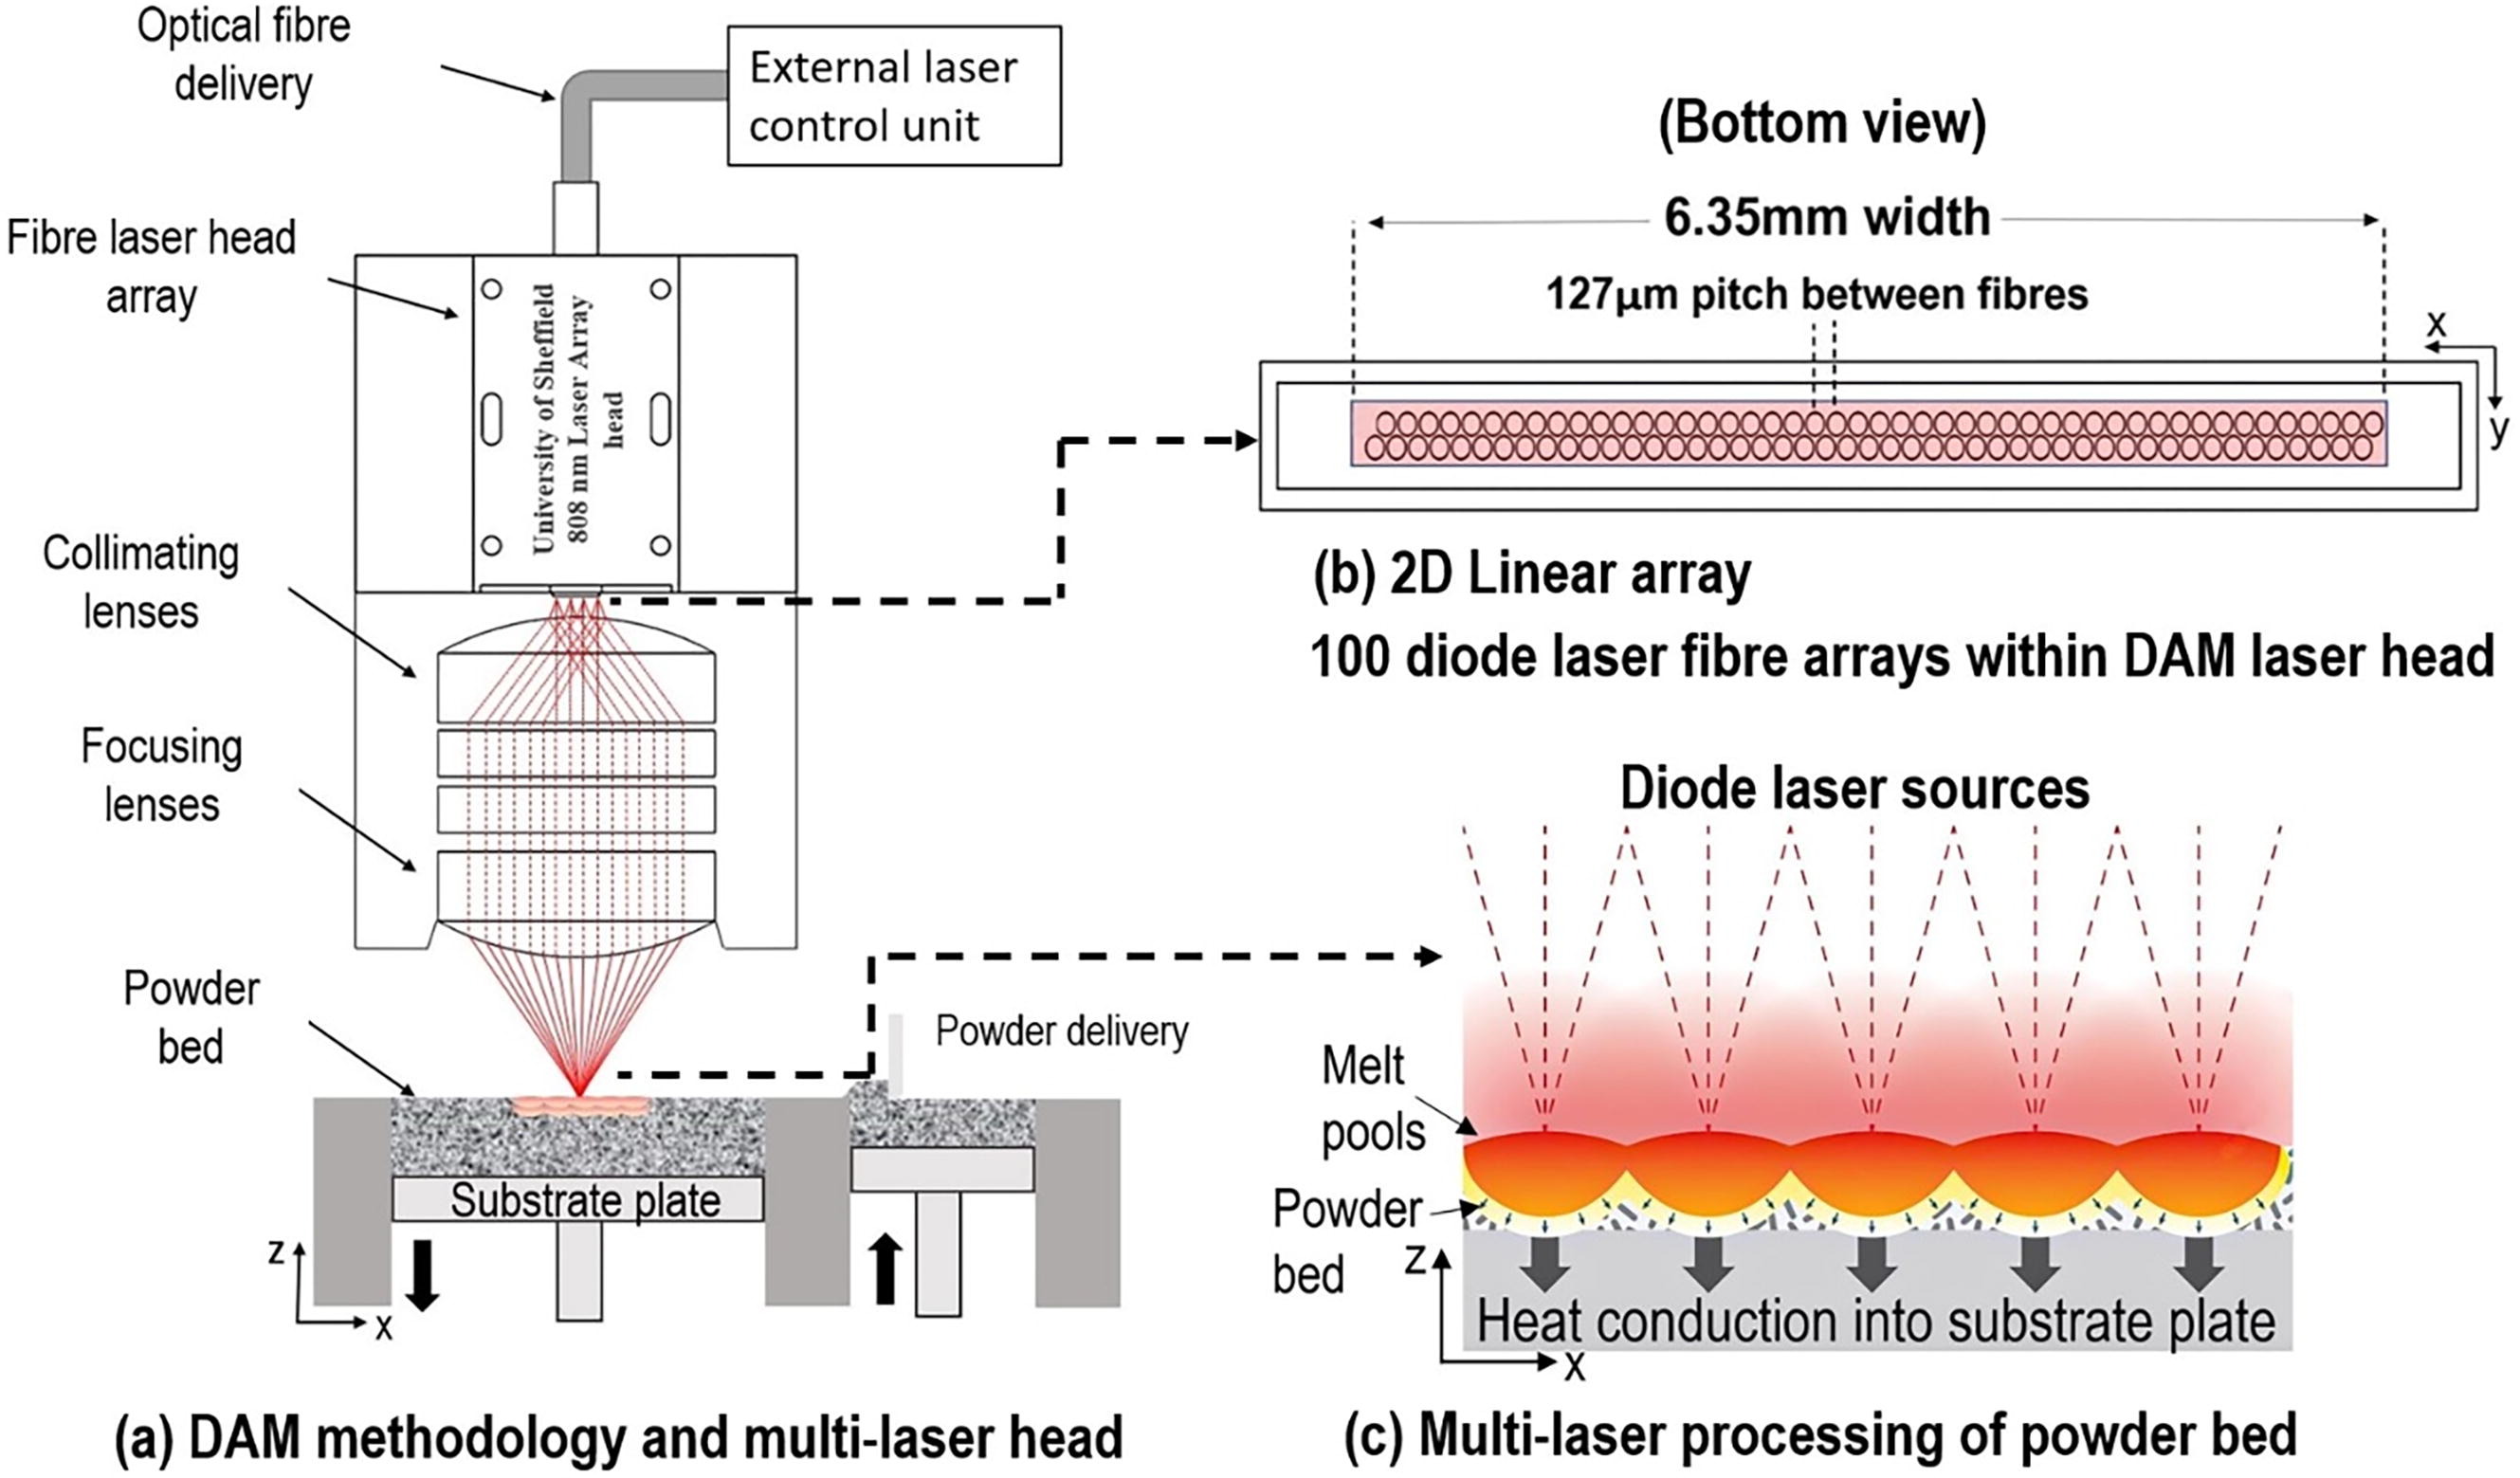 Diode area melting of Ti6Al4V using 808 nm laser sources and variable multi-beam profiles. - (a) Schematic of DAM (b) laser head beam profile configuration (c) schematic of melt pool.